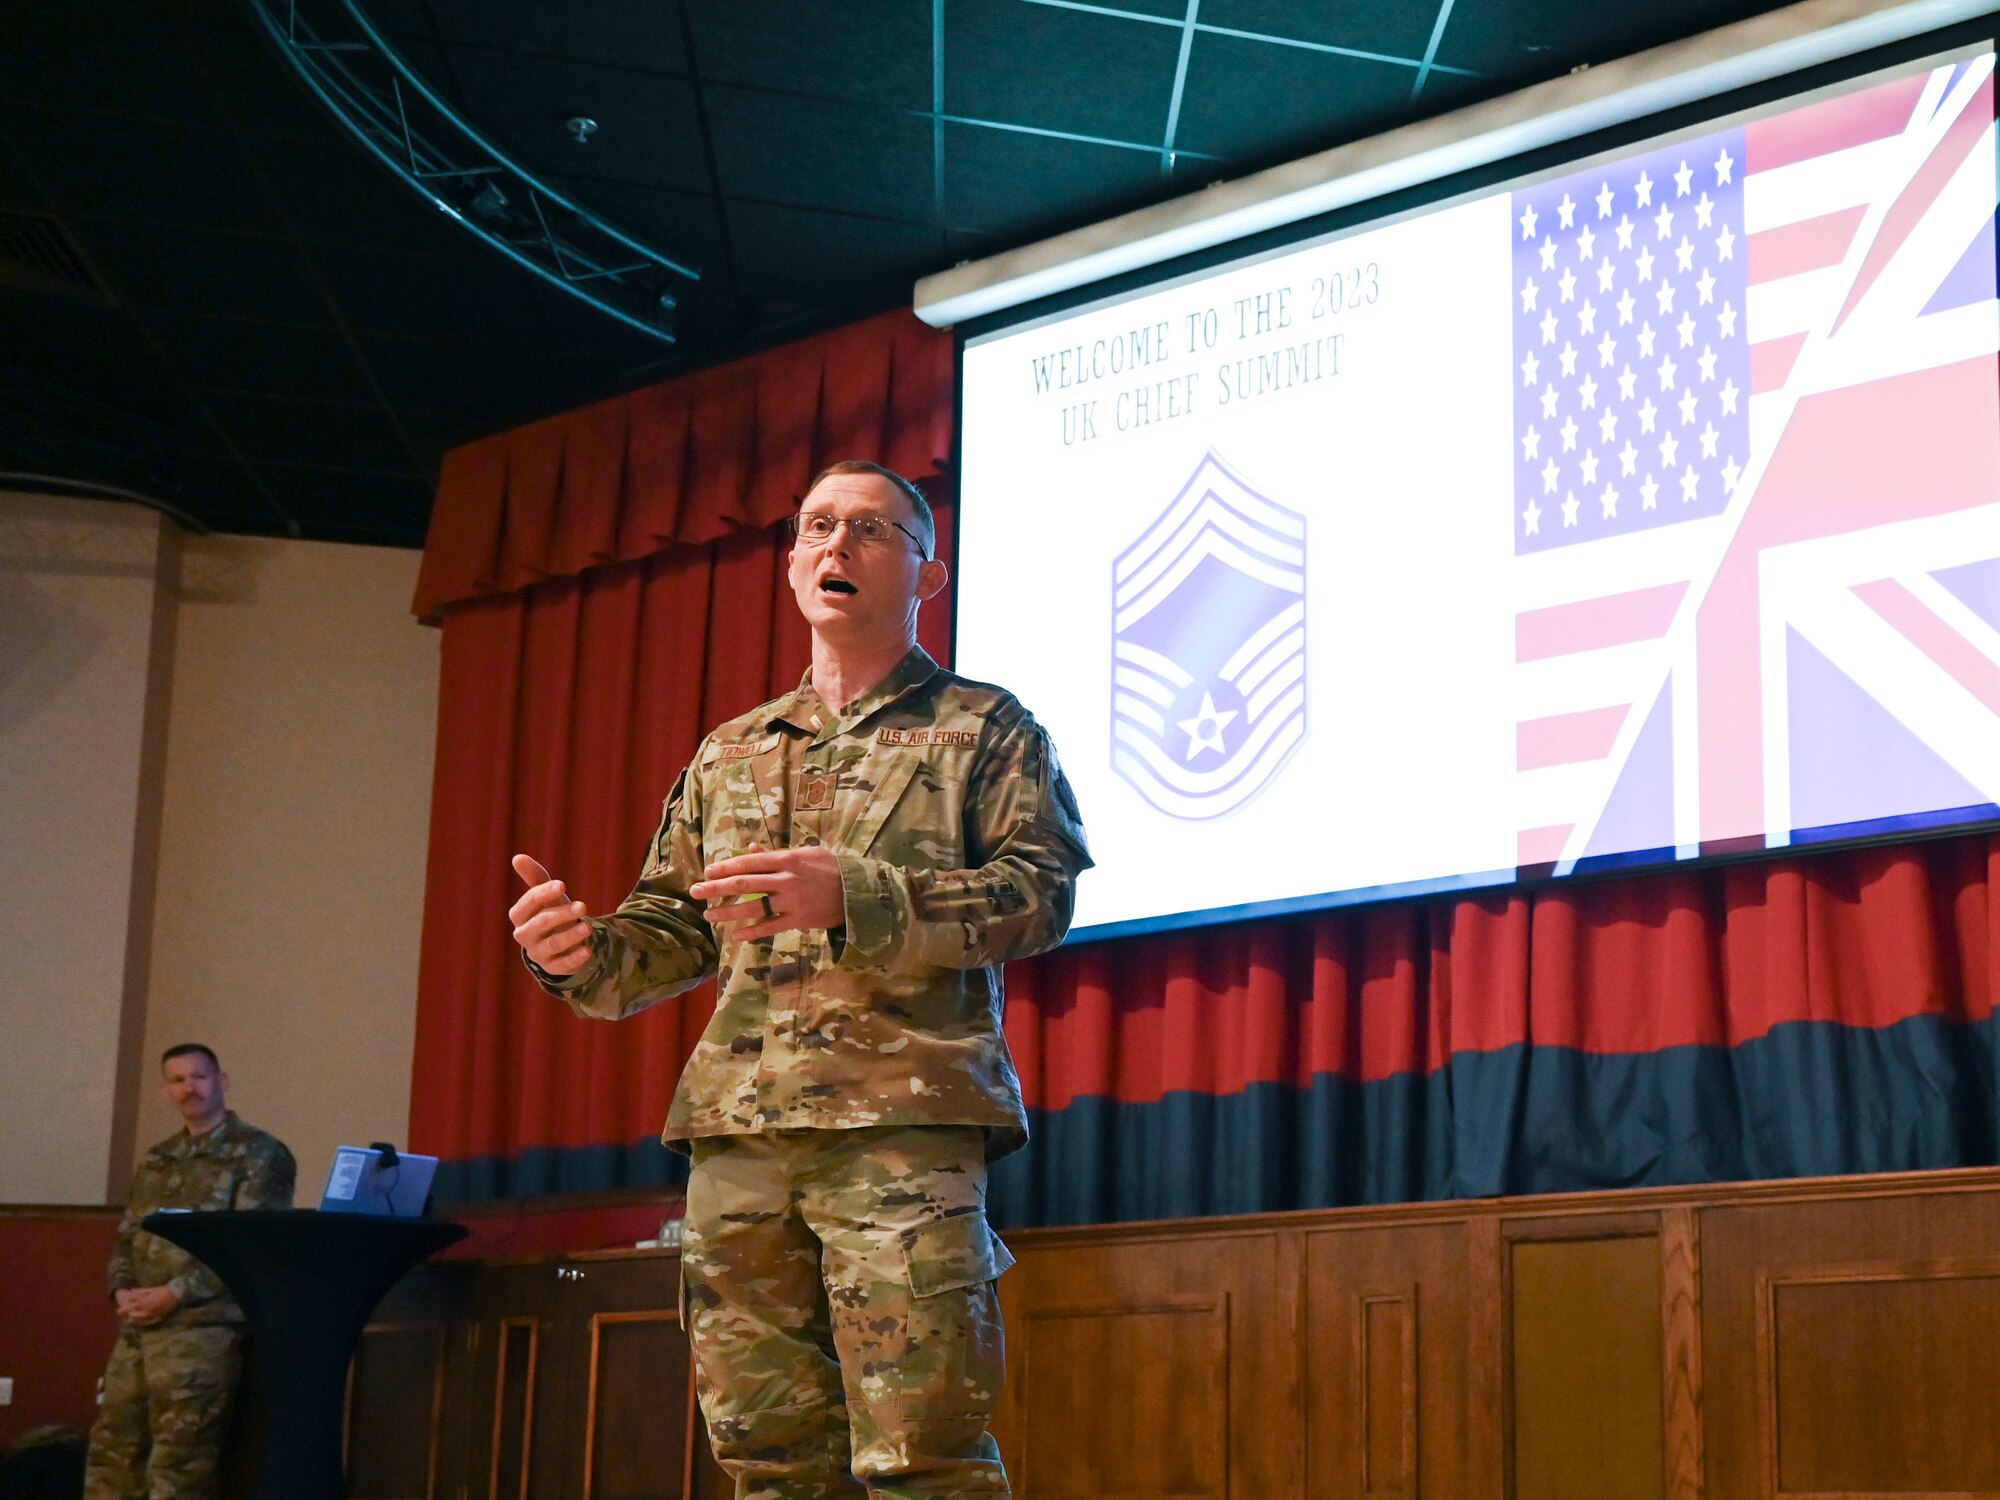 One of the main topics discussed was the development of future senior enlisted leaders in the Air Force.